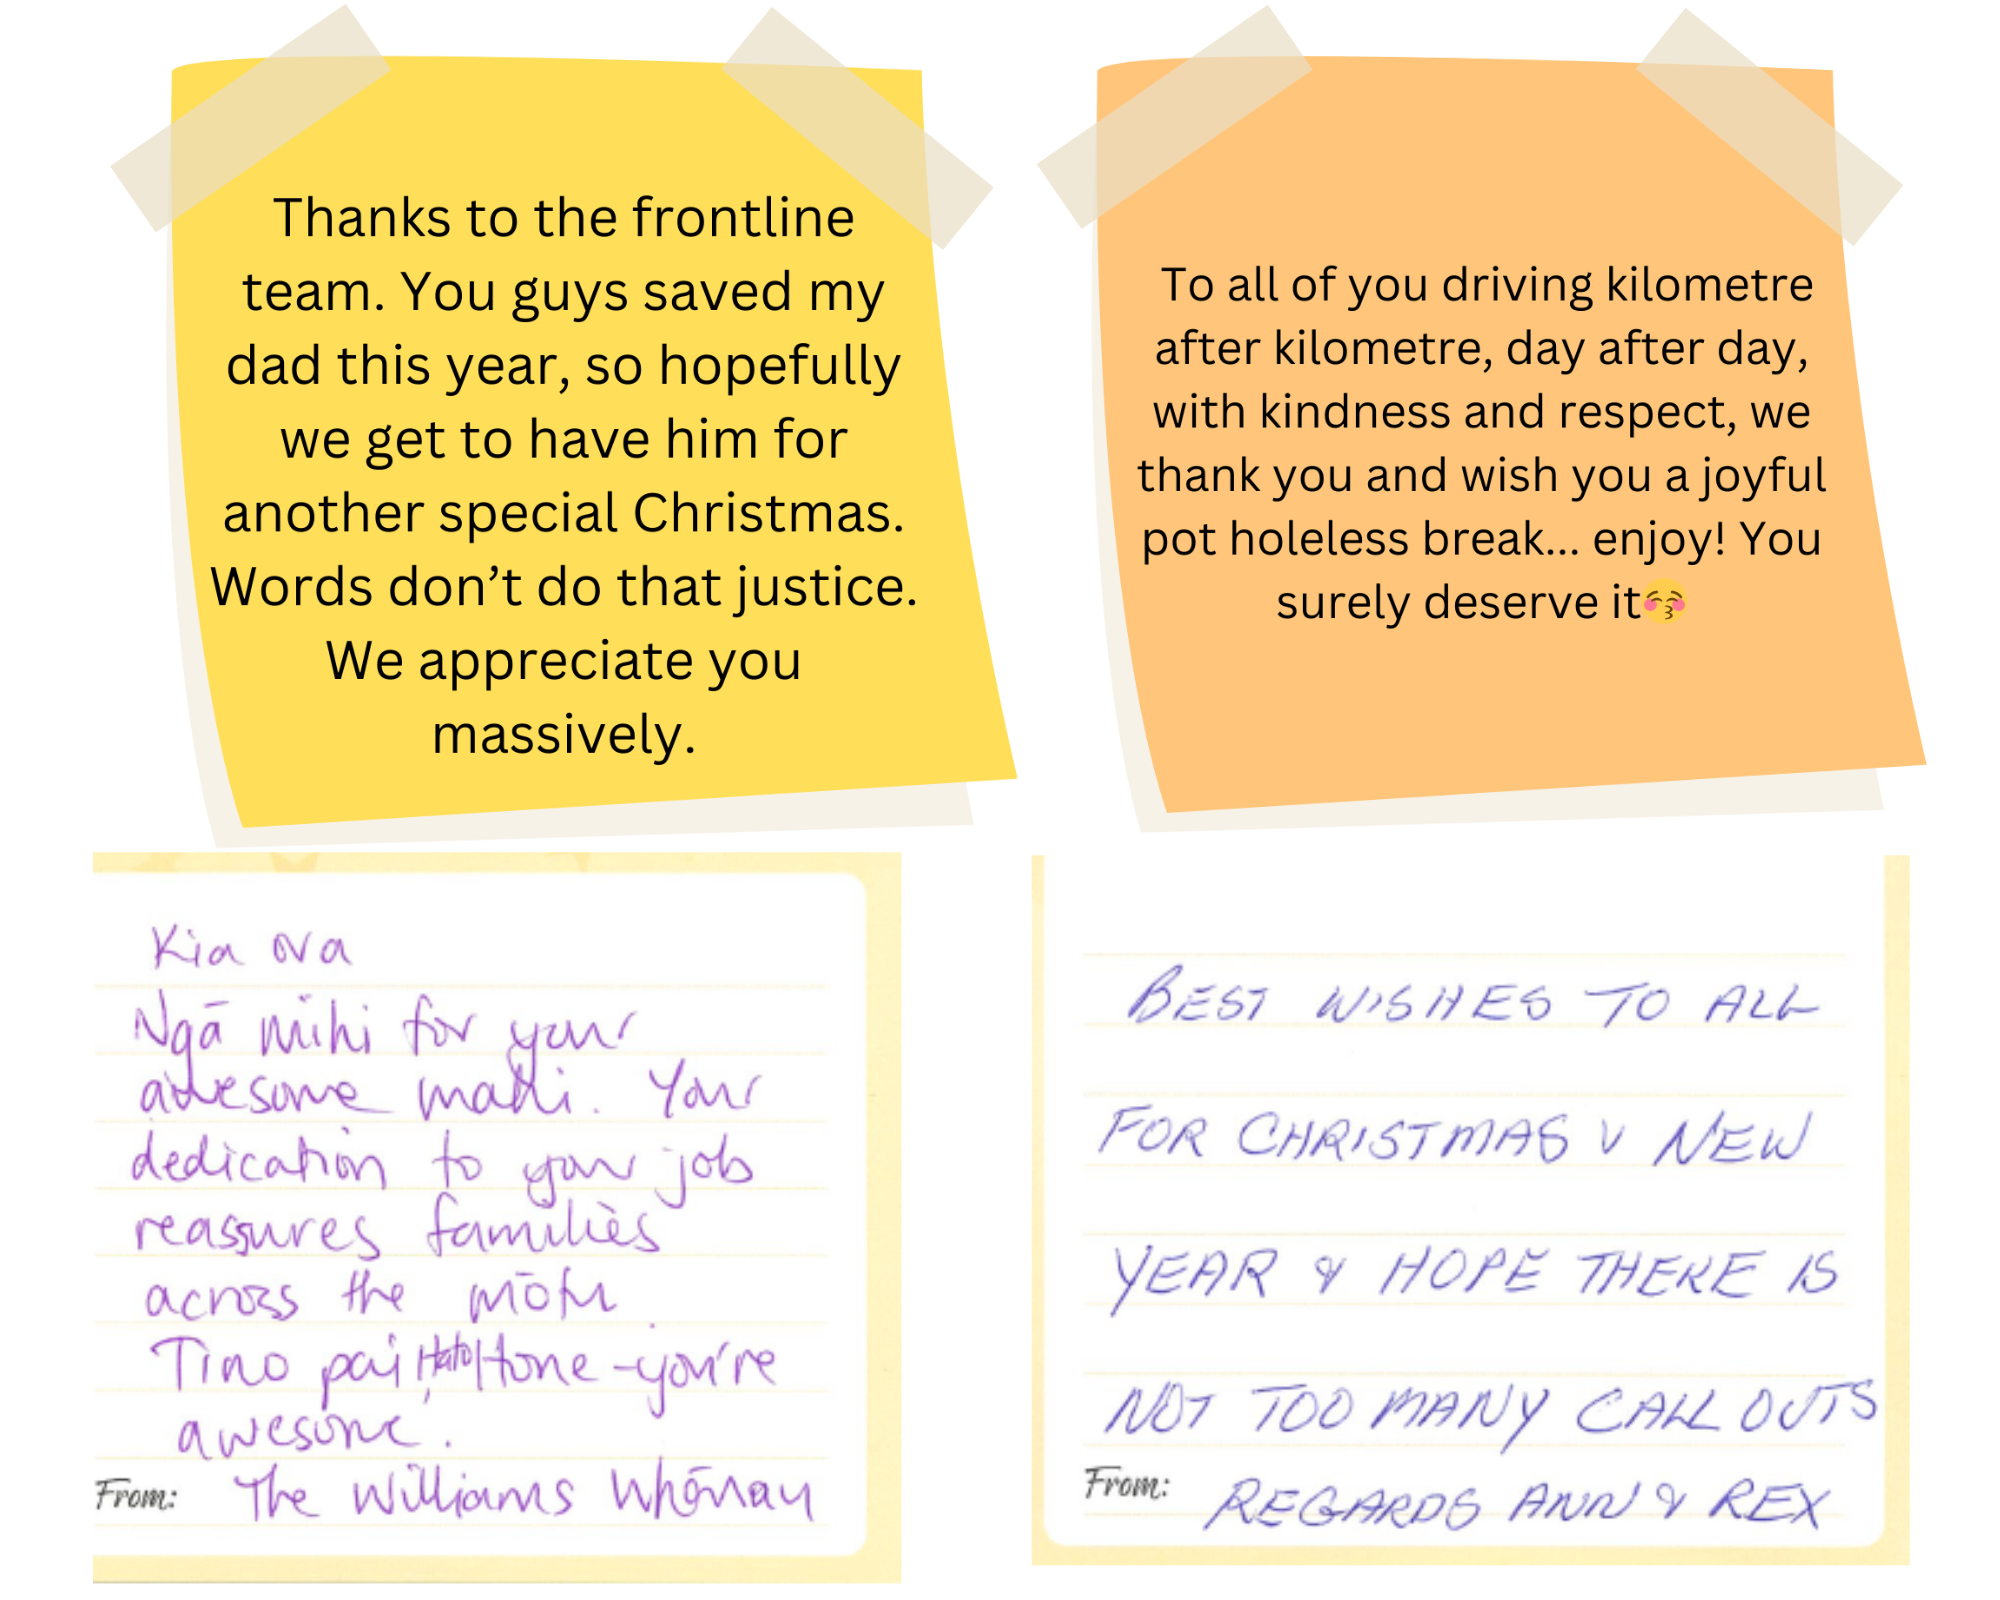 Messages of thanks and season's greetings 